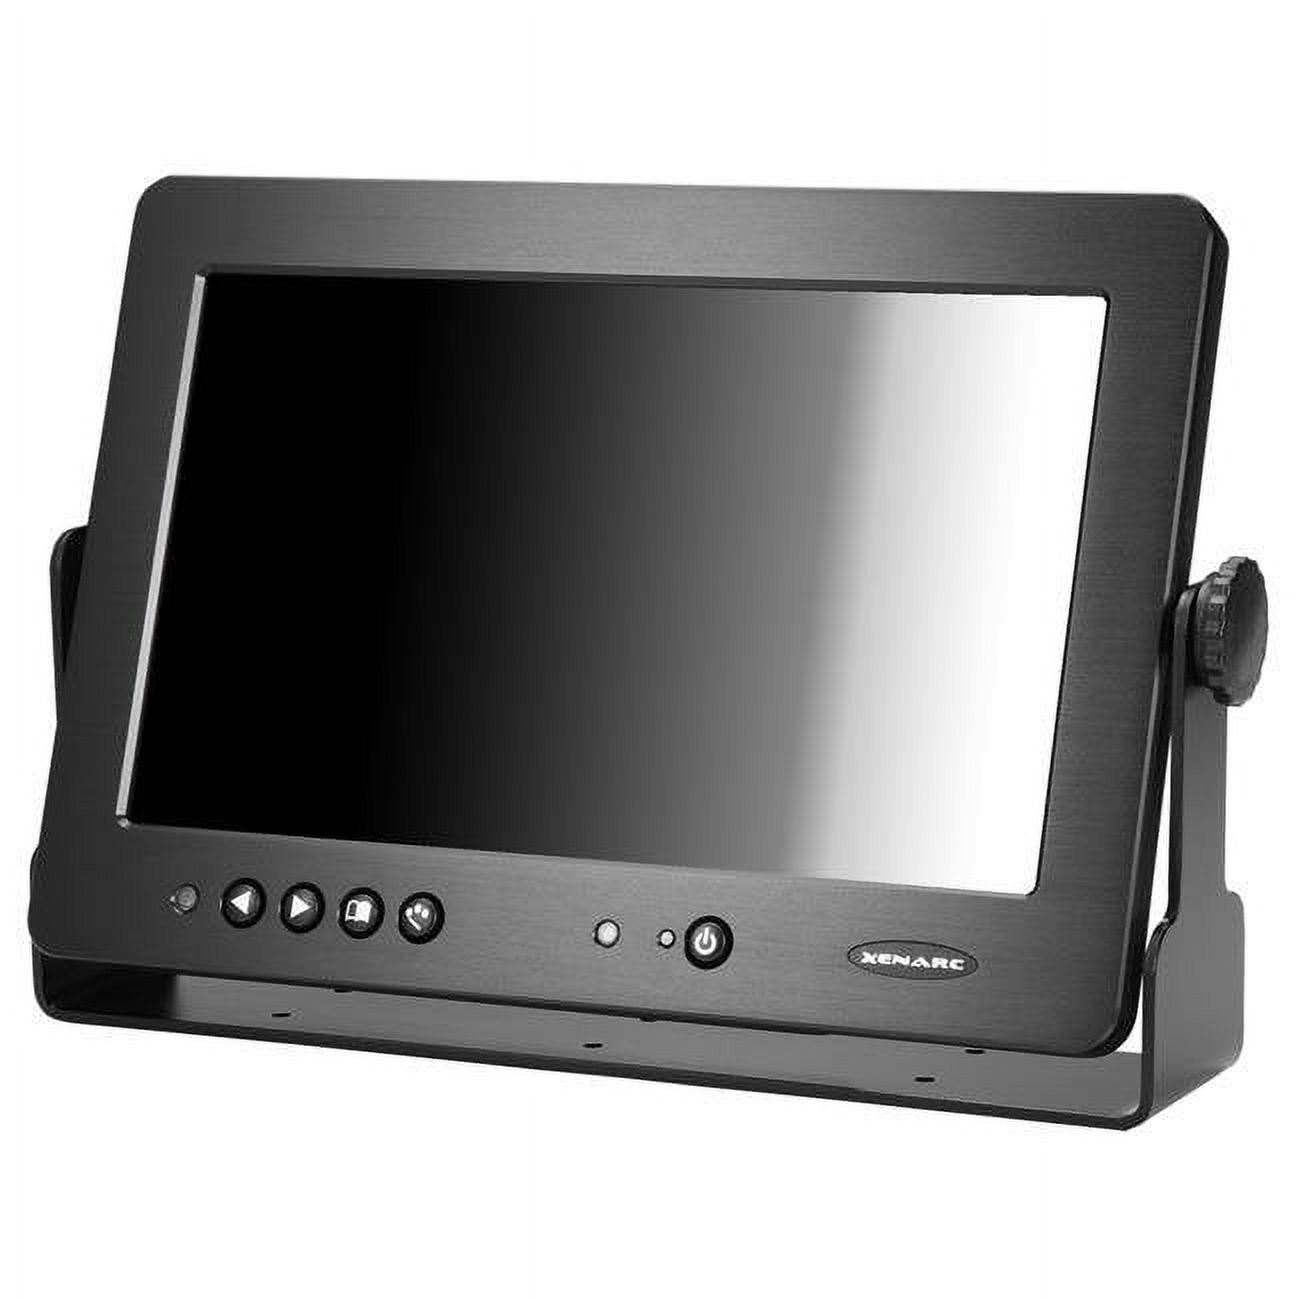 Xenarc 1022TSH 10.1 in. HDMI LCD Monitor with Touchscreen Sunlight Readable - image 1 of 5